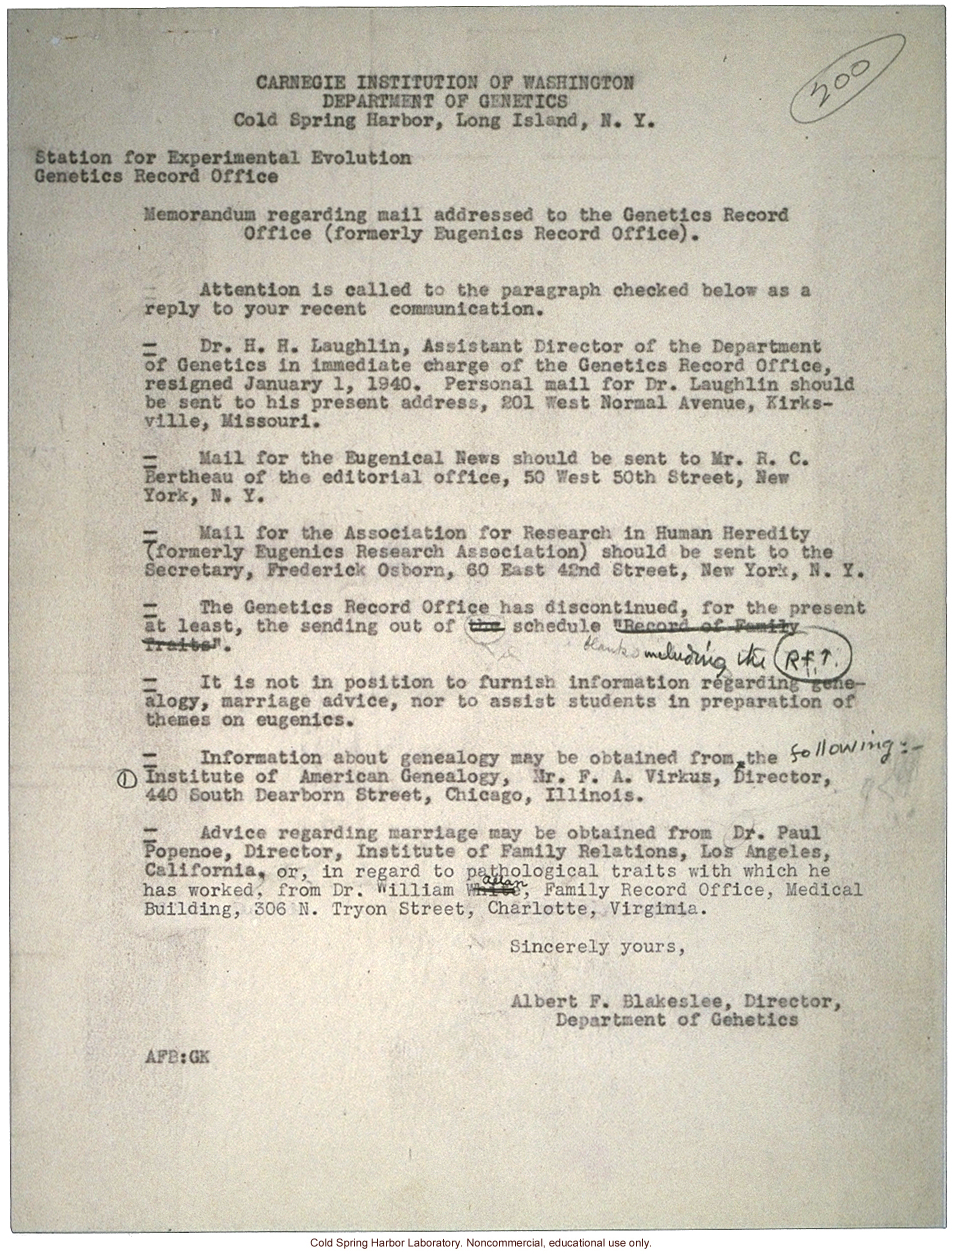 Albert F. Blakeslee memo about procedures for answering mail after closure of the Eugenics Record Office